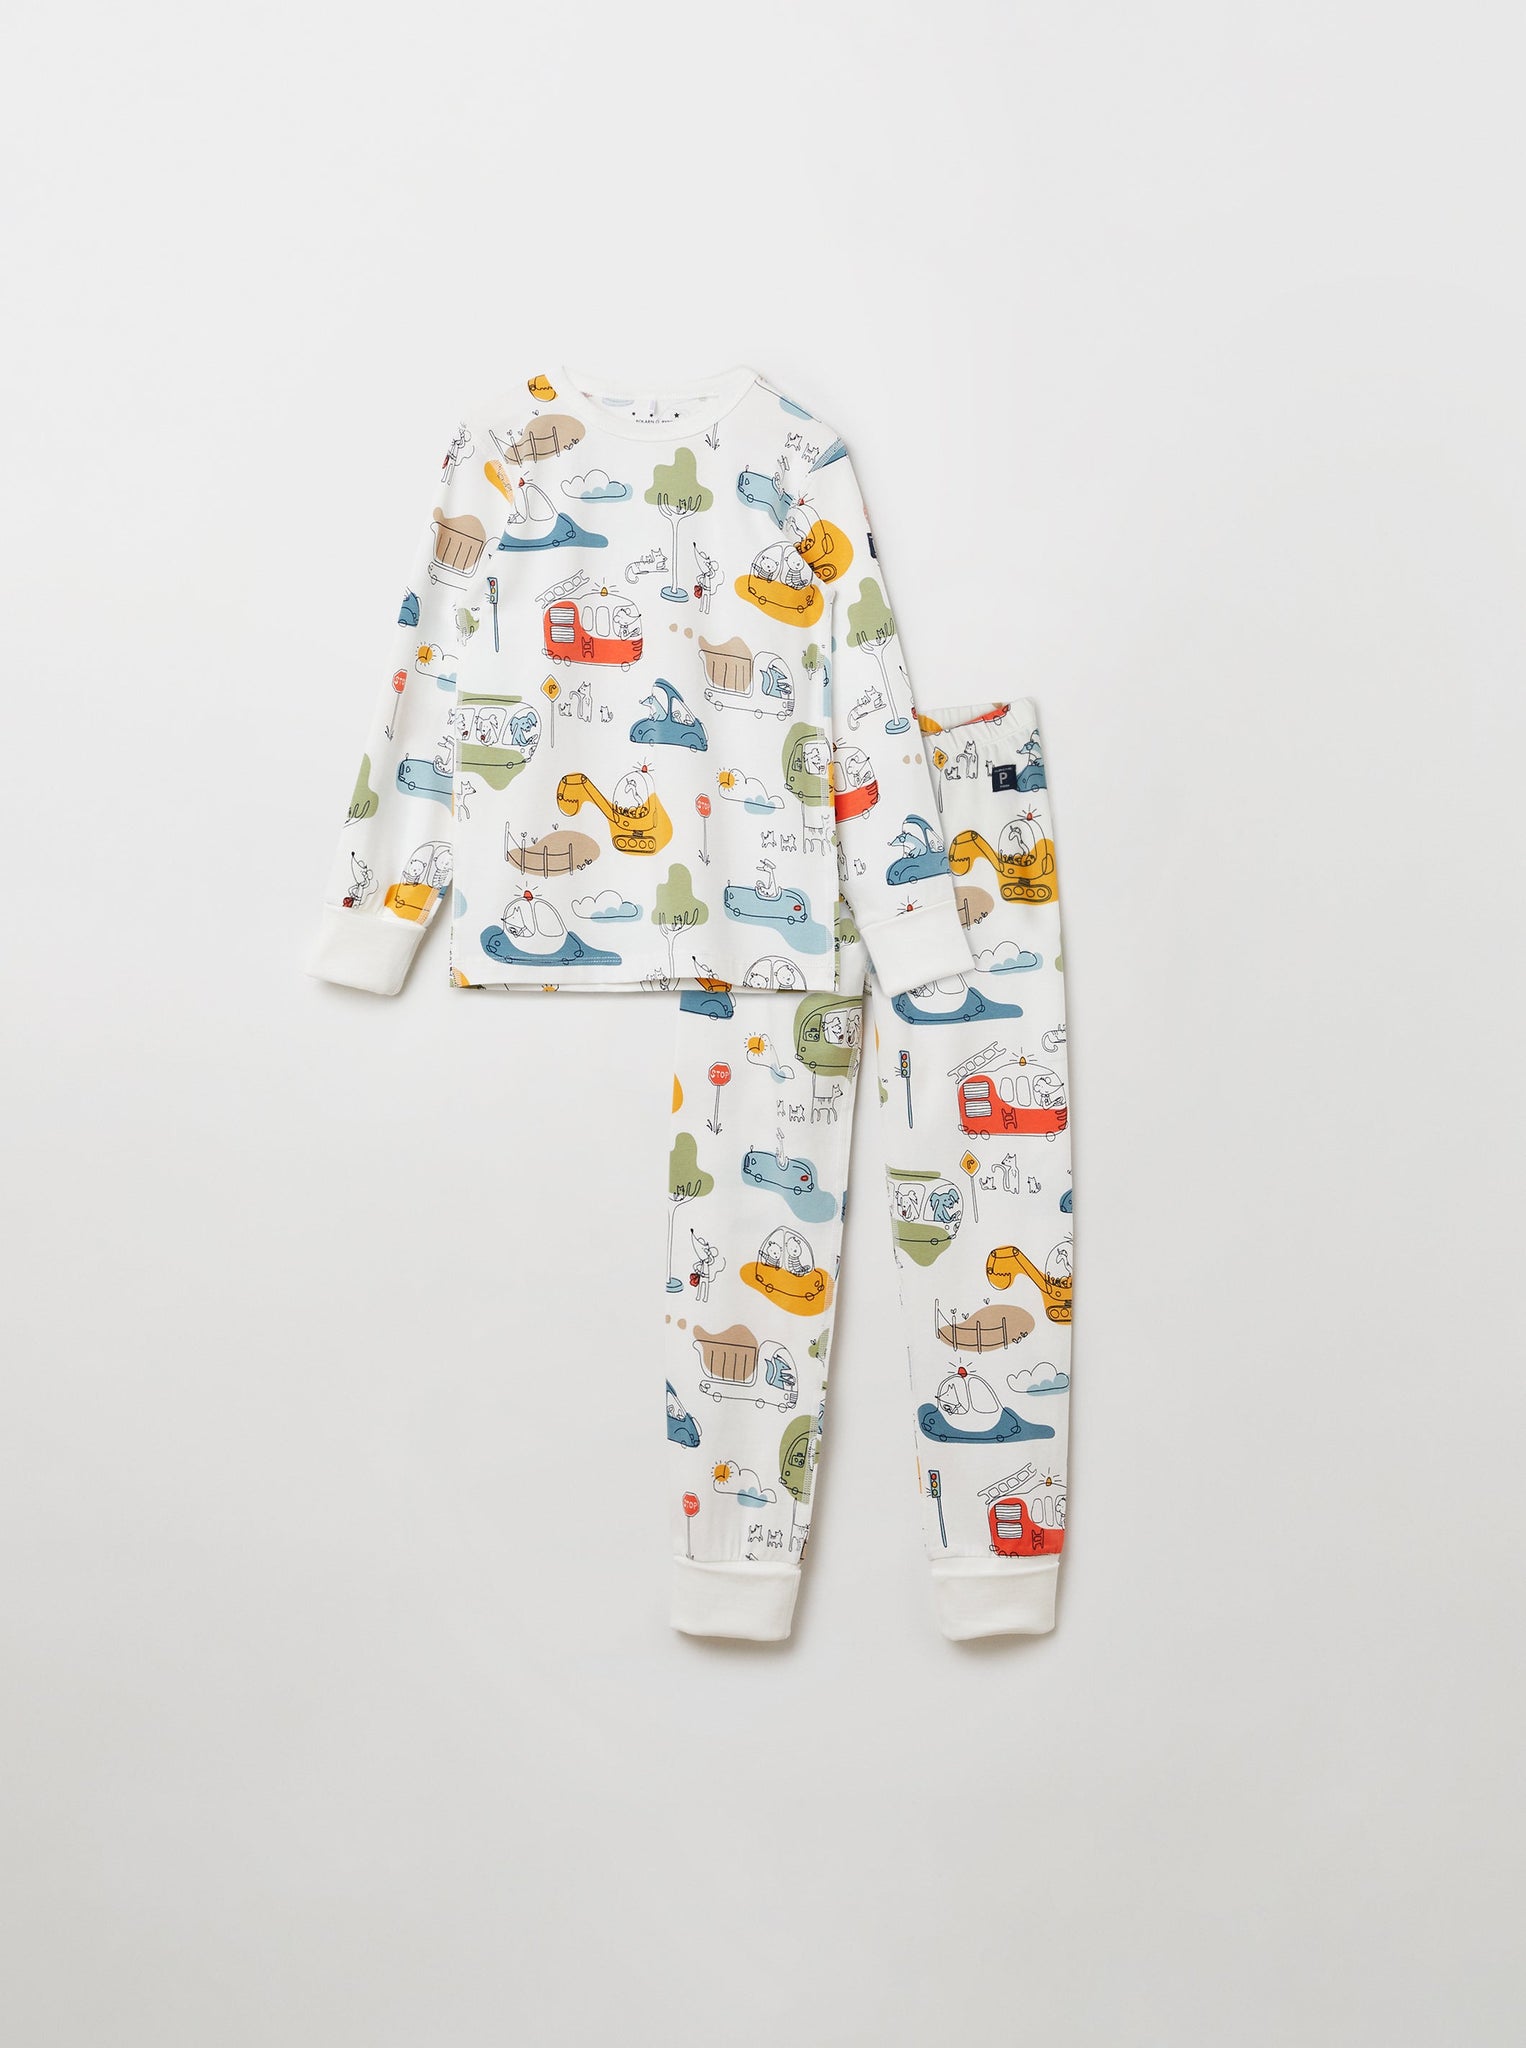 Cotton Animal Print Kids Pyjamas from the Polarn O. Pyret kidswear collection. Nordic kids clothes made from sustainable sources.